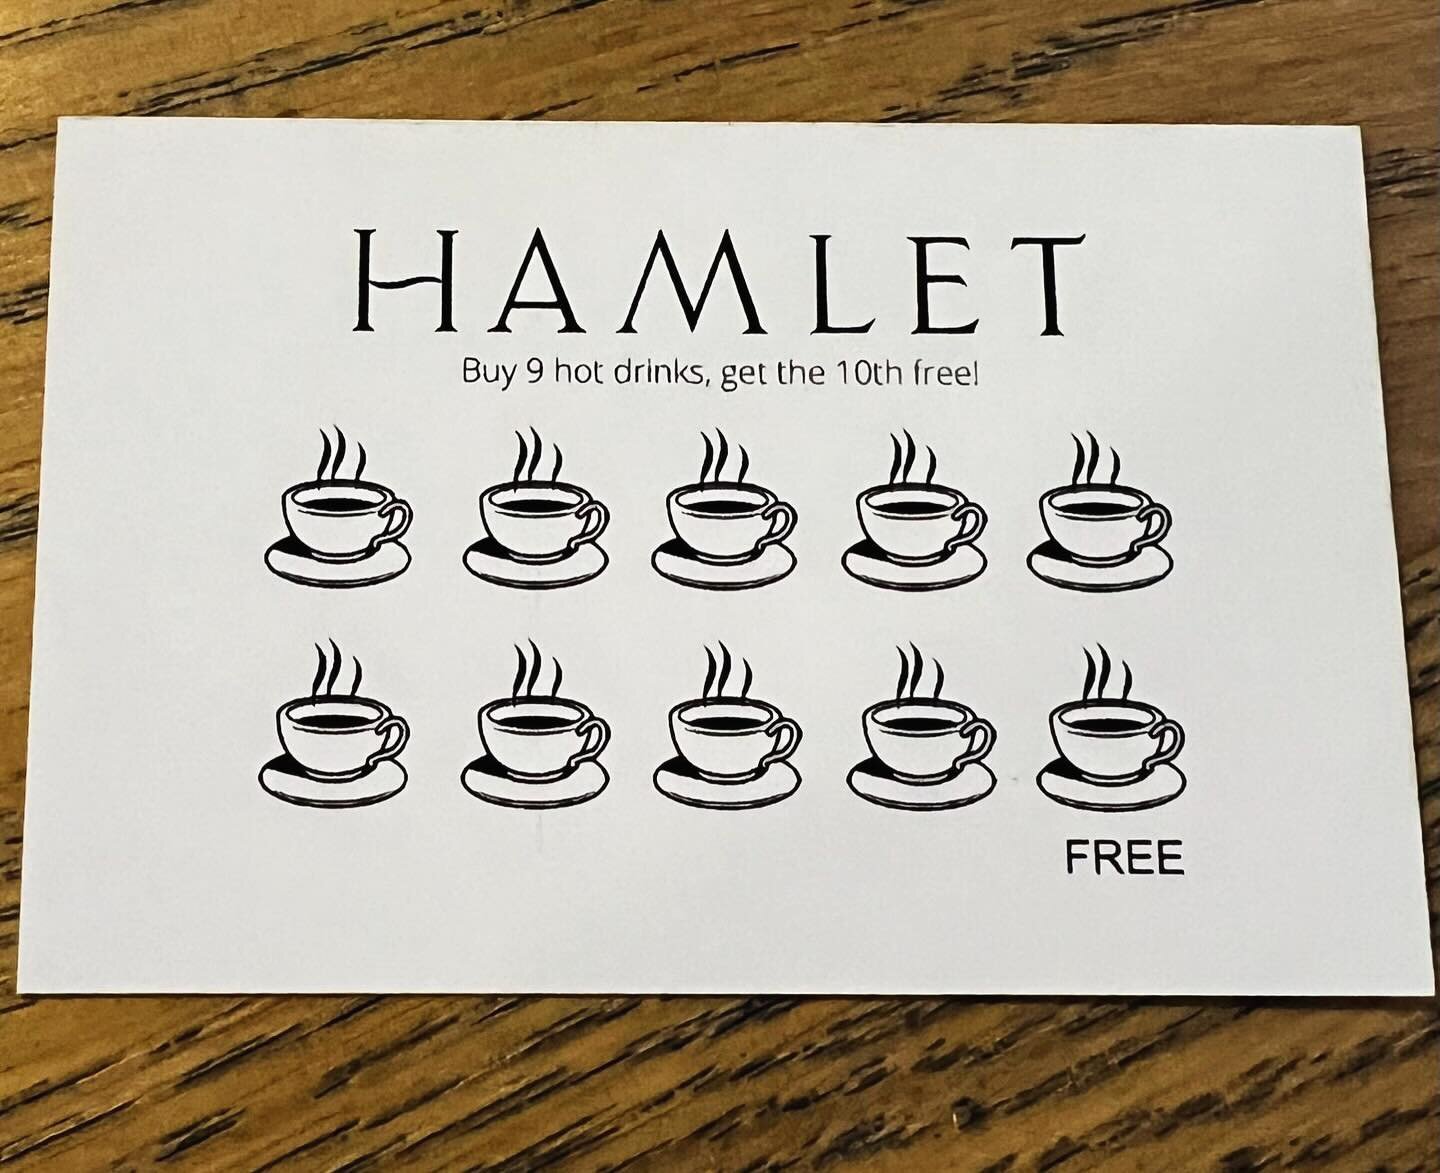 Hamlet regulars or newcomers - We have a loyalty card! Don&rsquo;t forget to get your stamps collected with every hot drink you buy and get the tenth free!